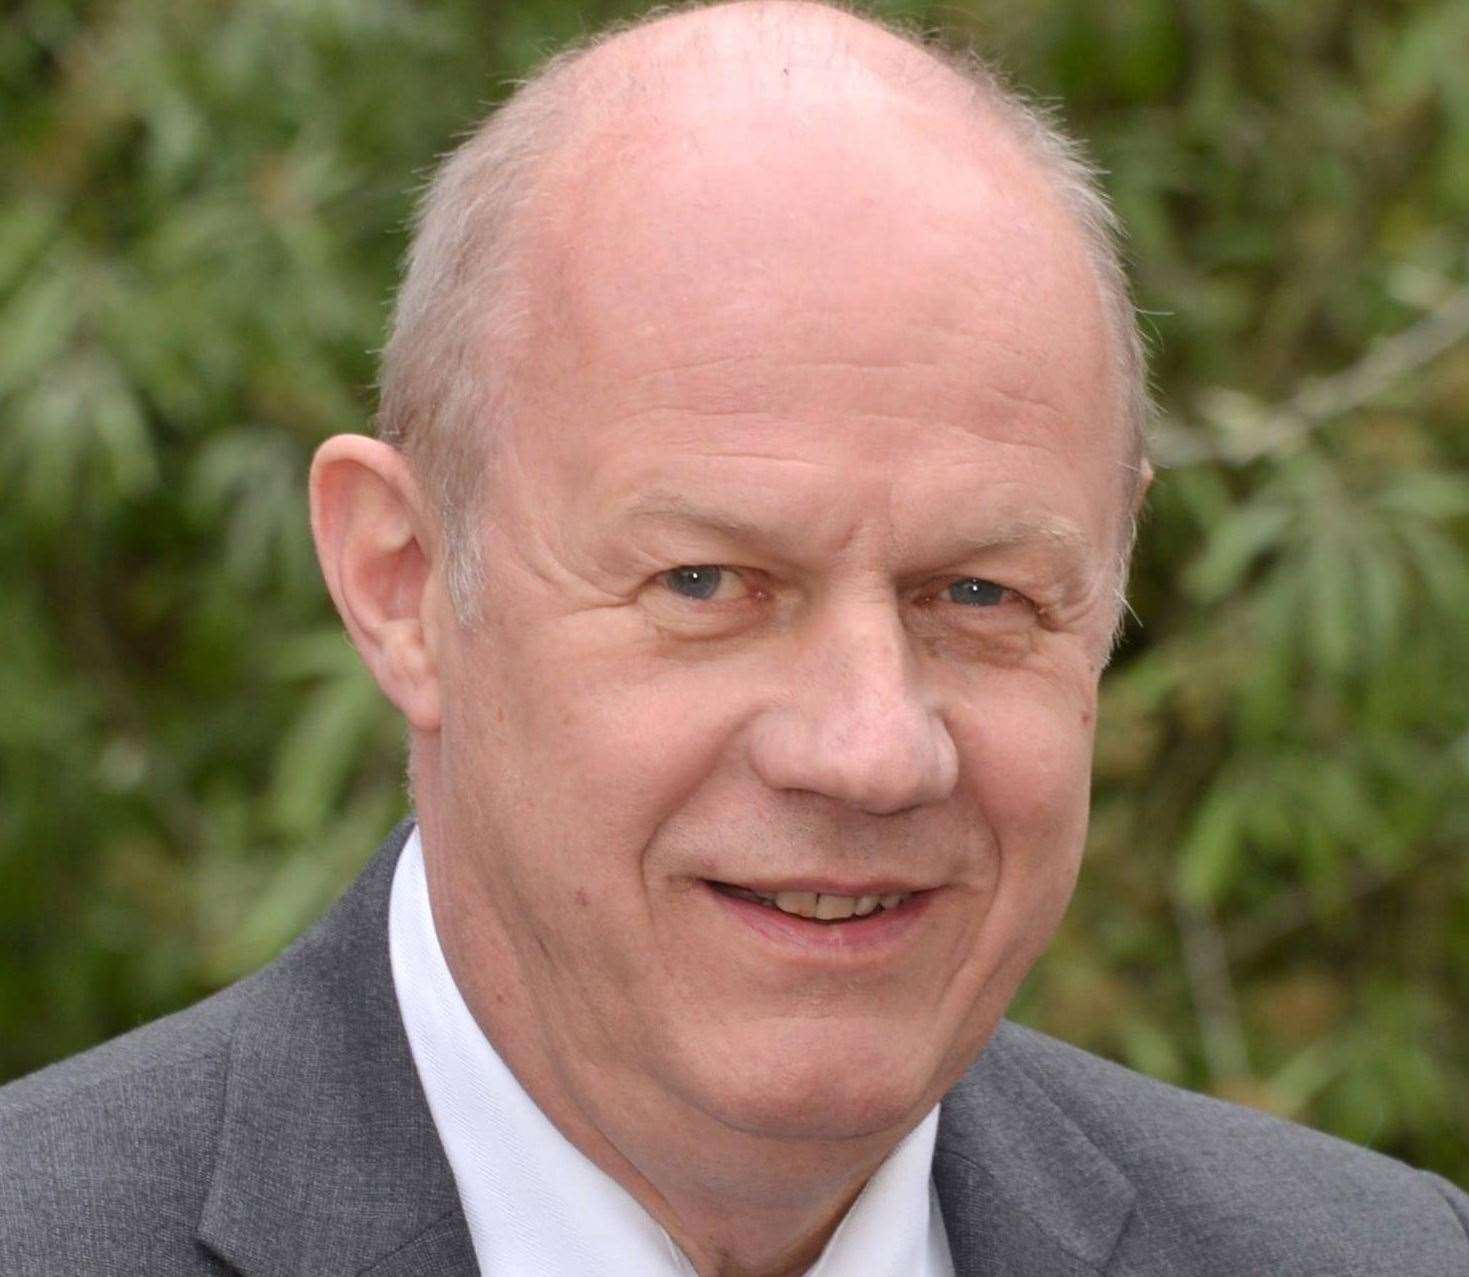 Ashford MP Damian Green abstained during last night's vote